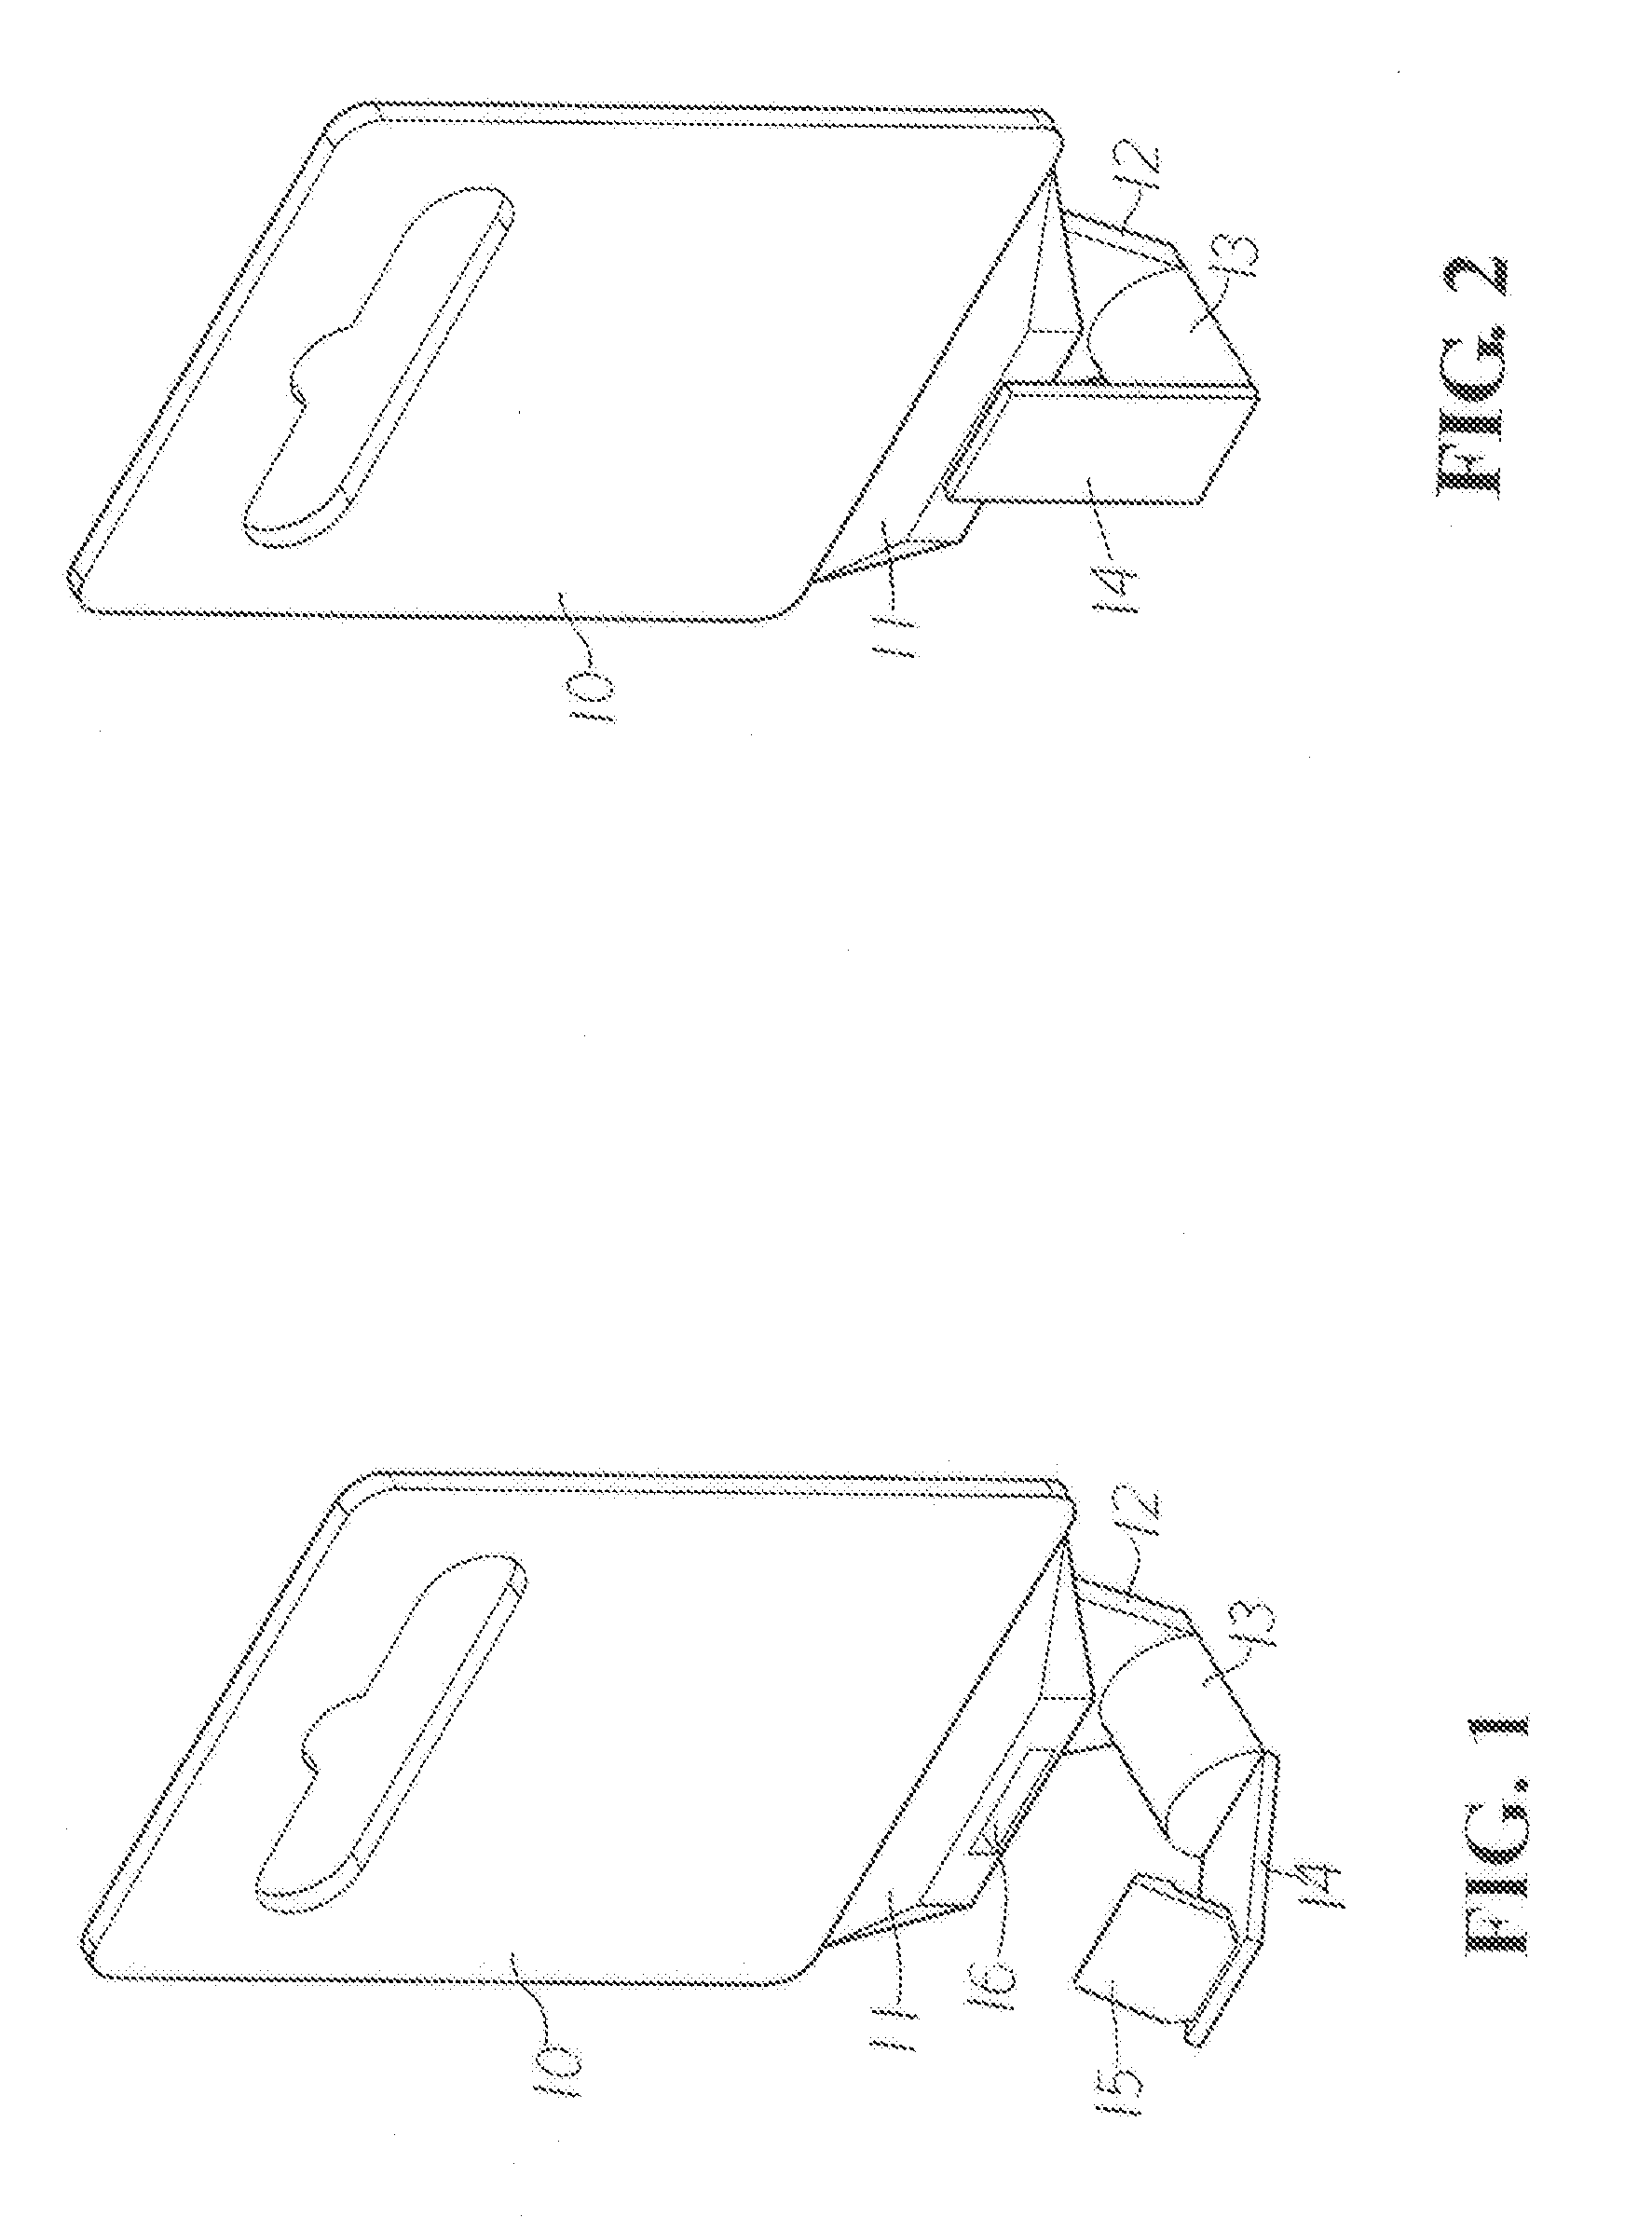 Suspension device for hand tools having ring portion